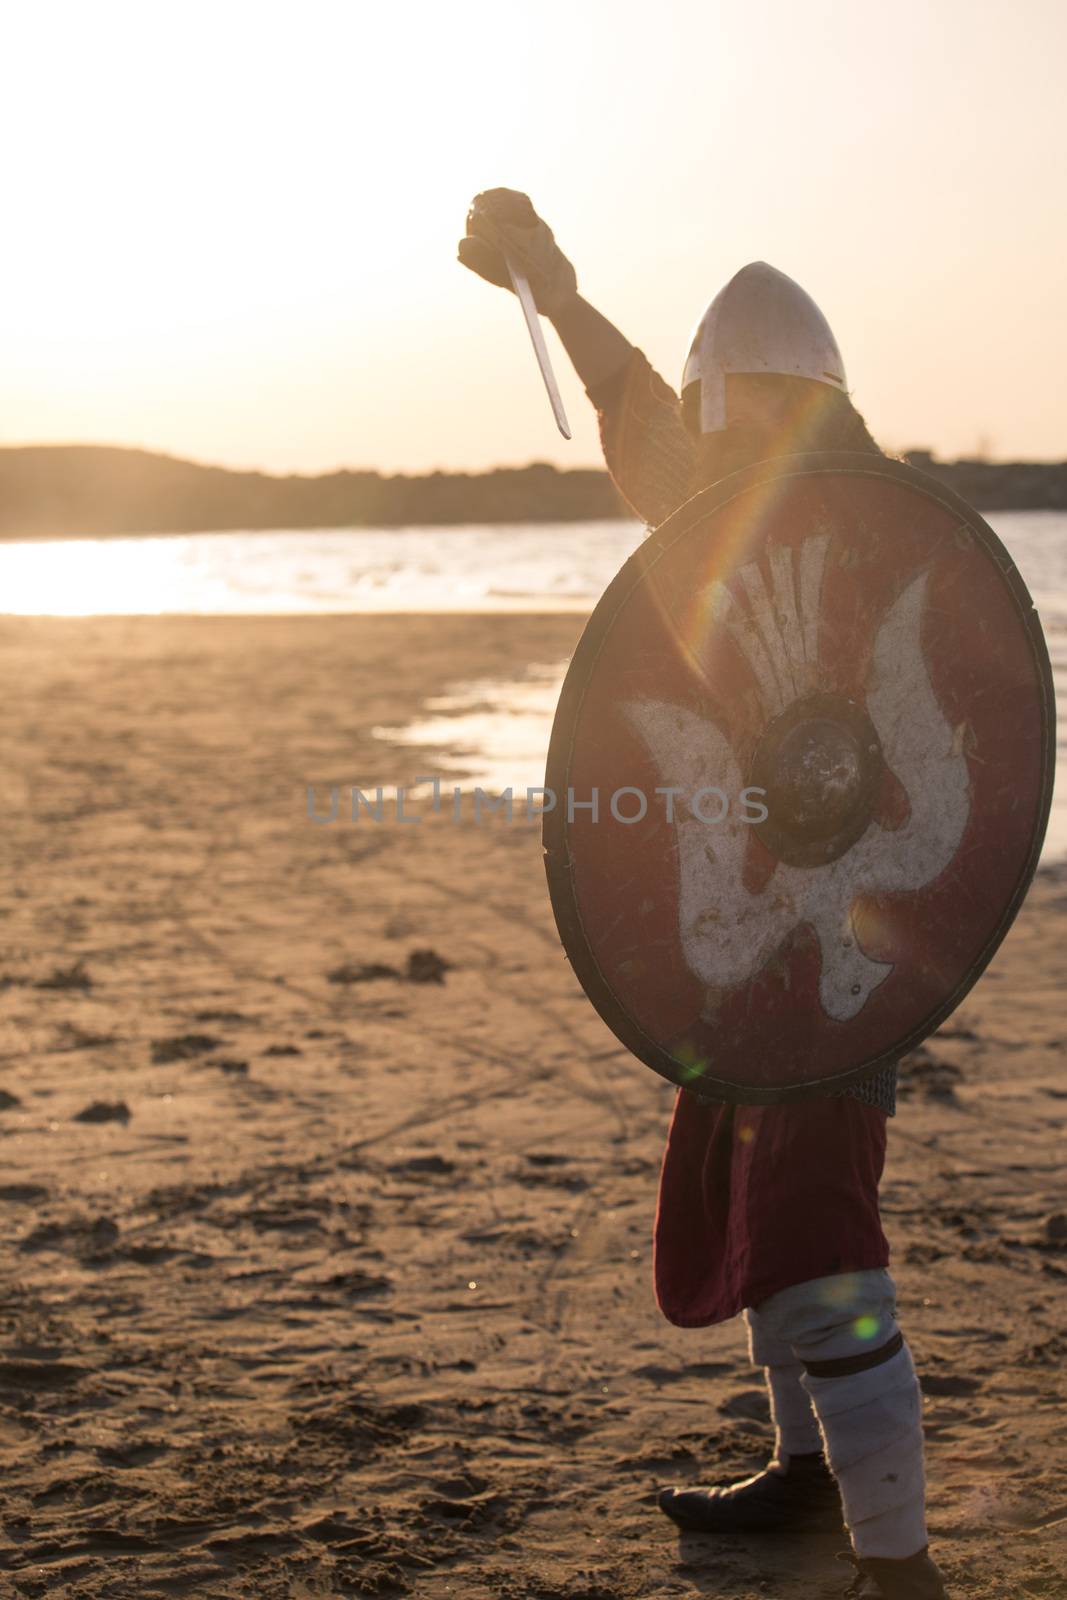 Portrait of slavic warrior reenactor with sword and shield posing outdoors at seaside